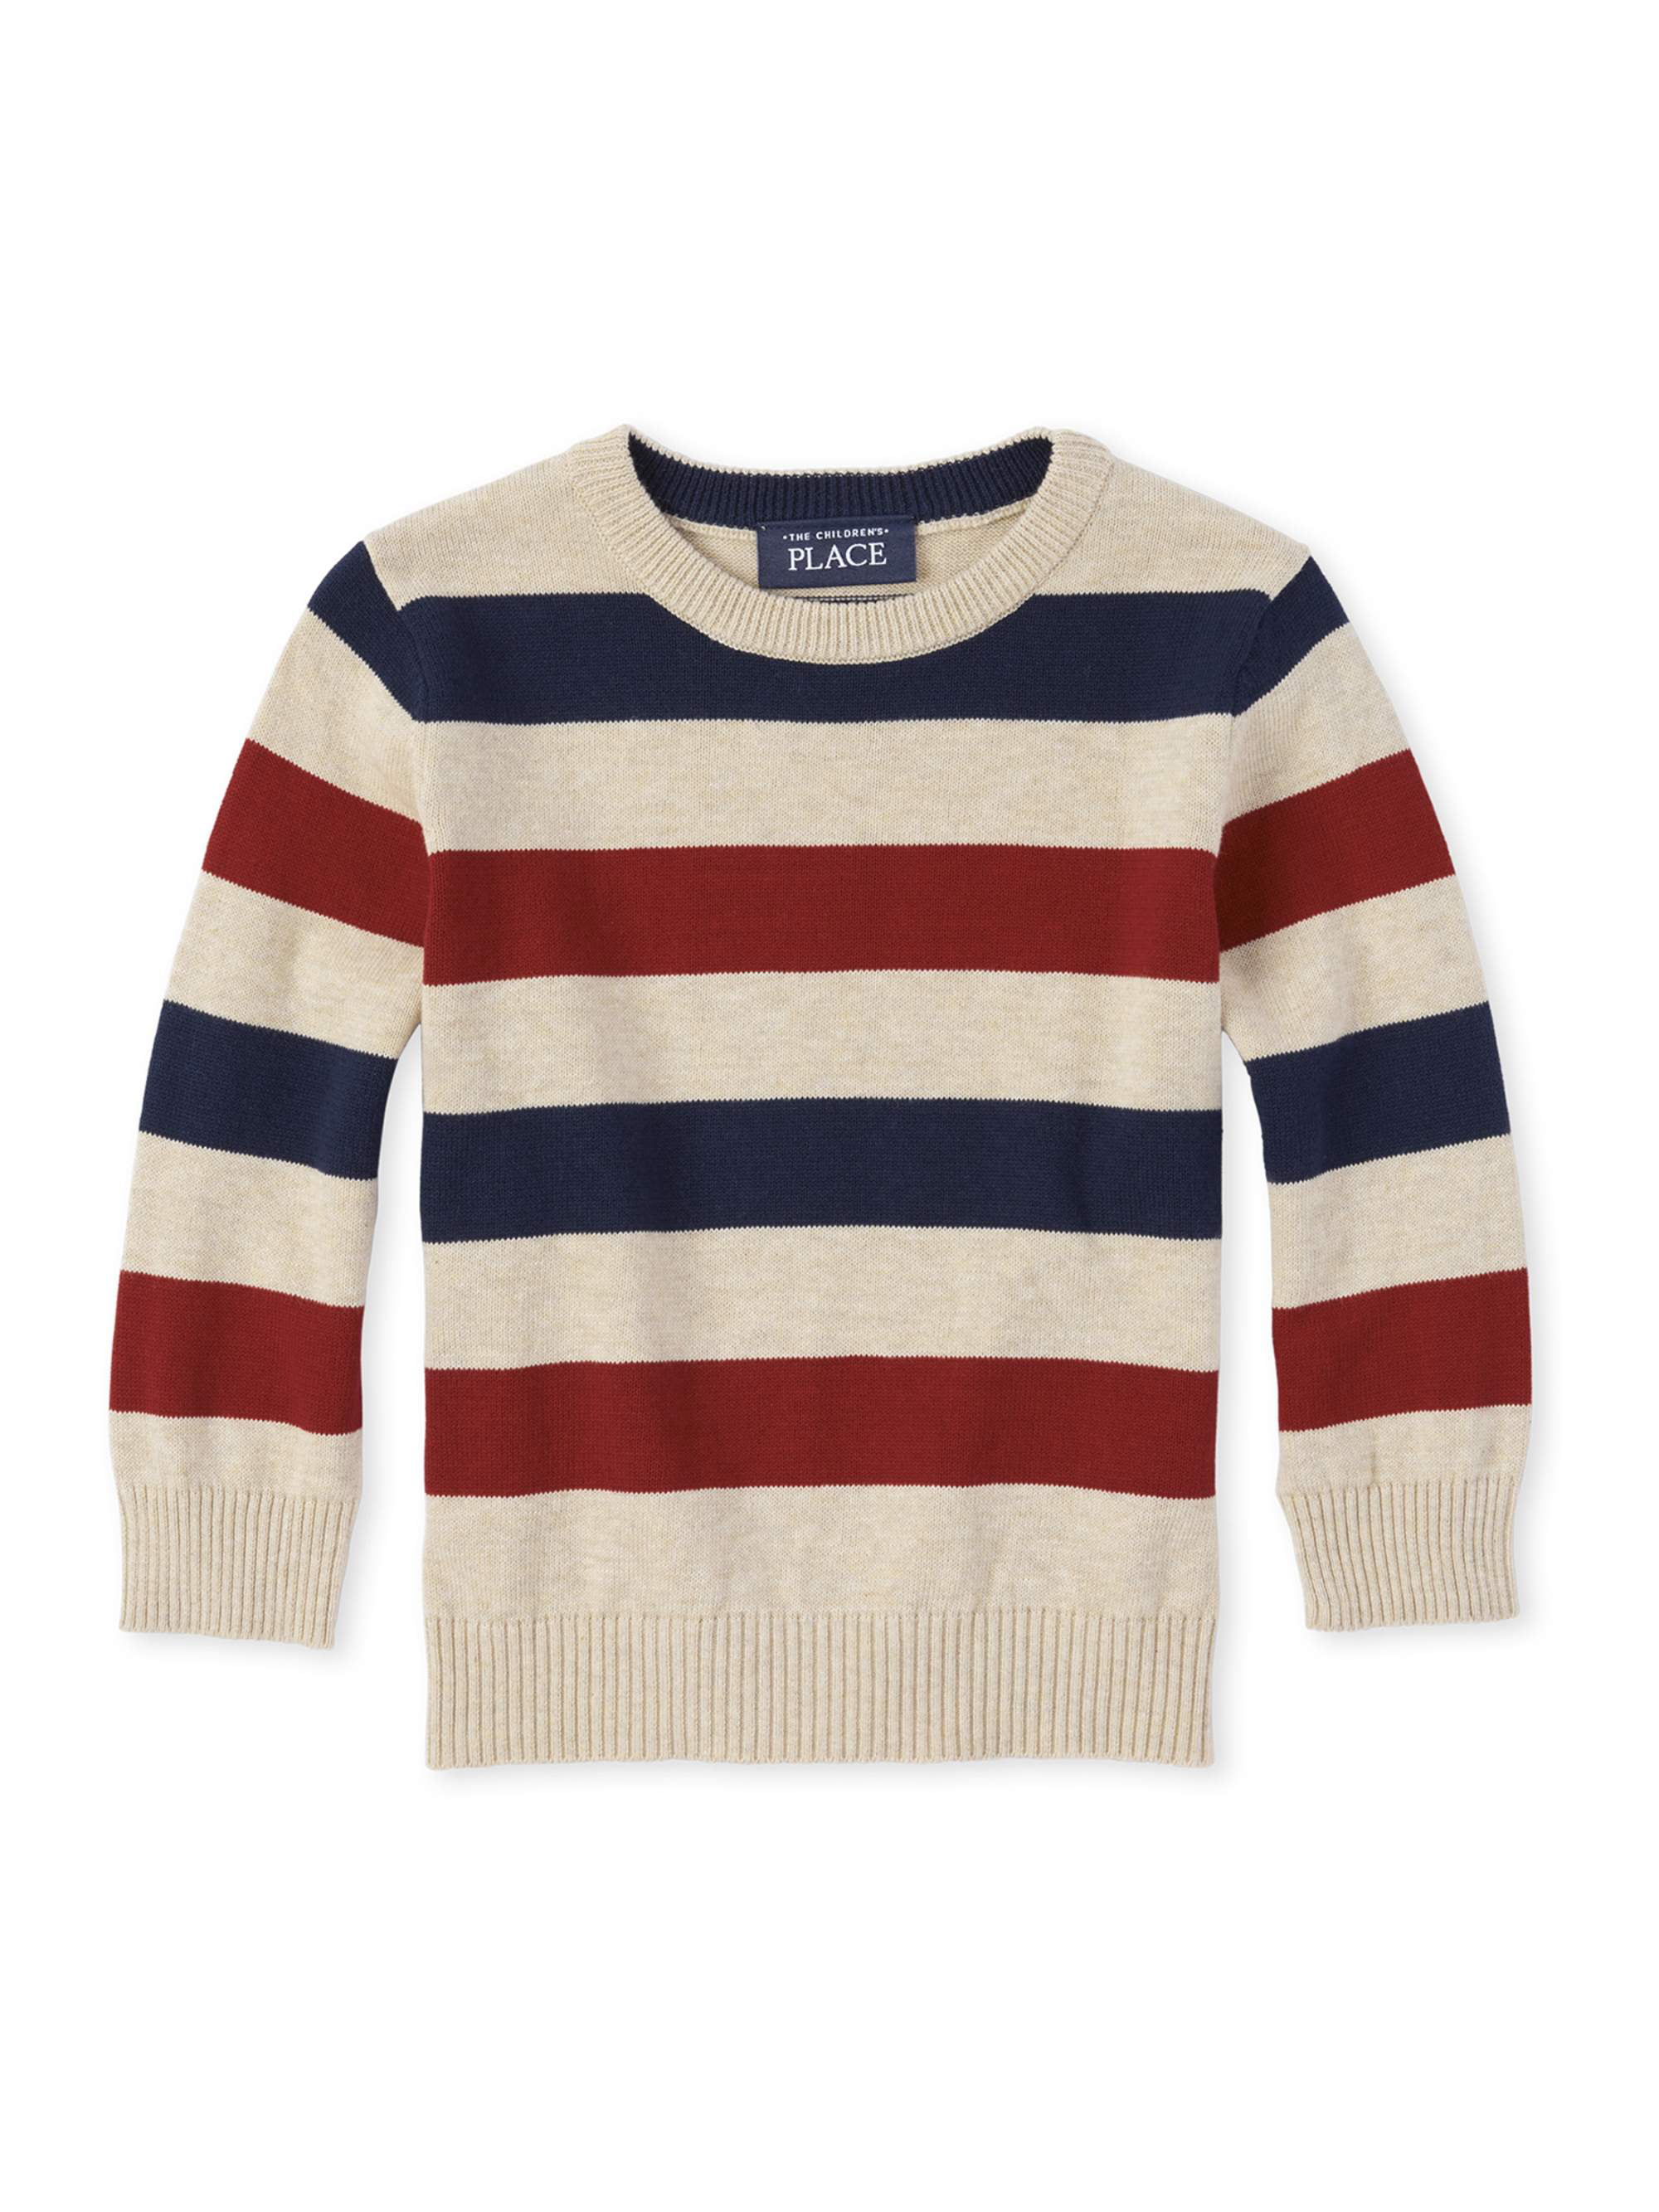 The Childrens Place Boys Toddler Striped Sweater 